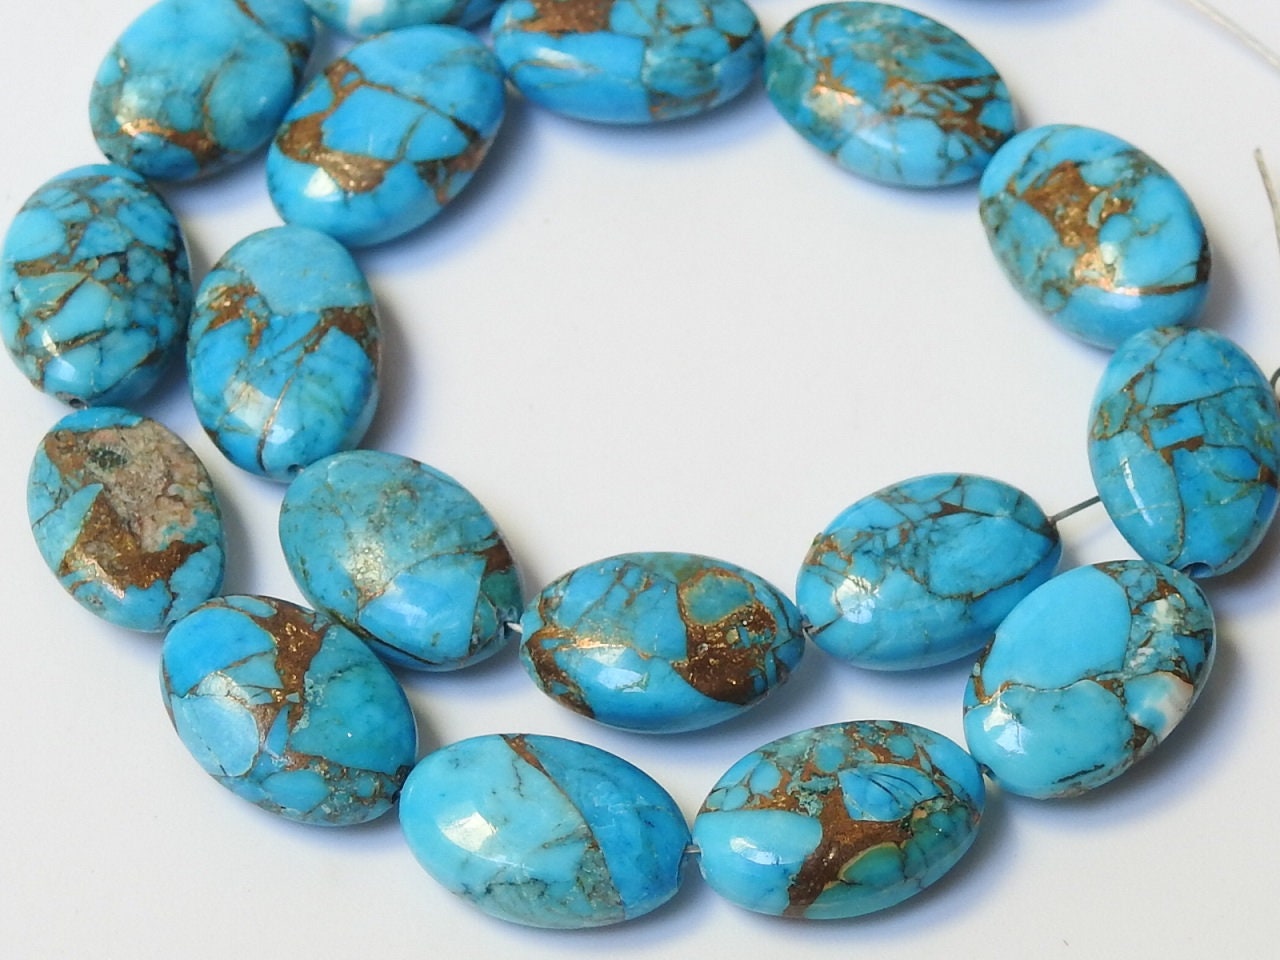 Copper Turquoise Smooth Oval Shape,Nugget,Loose Stone,Handmade Bead,For Making Jewelry 10 Piece Strand 12X8 MM Approx | Save 33% - Rajasthan Living 13